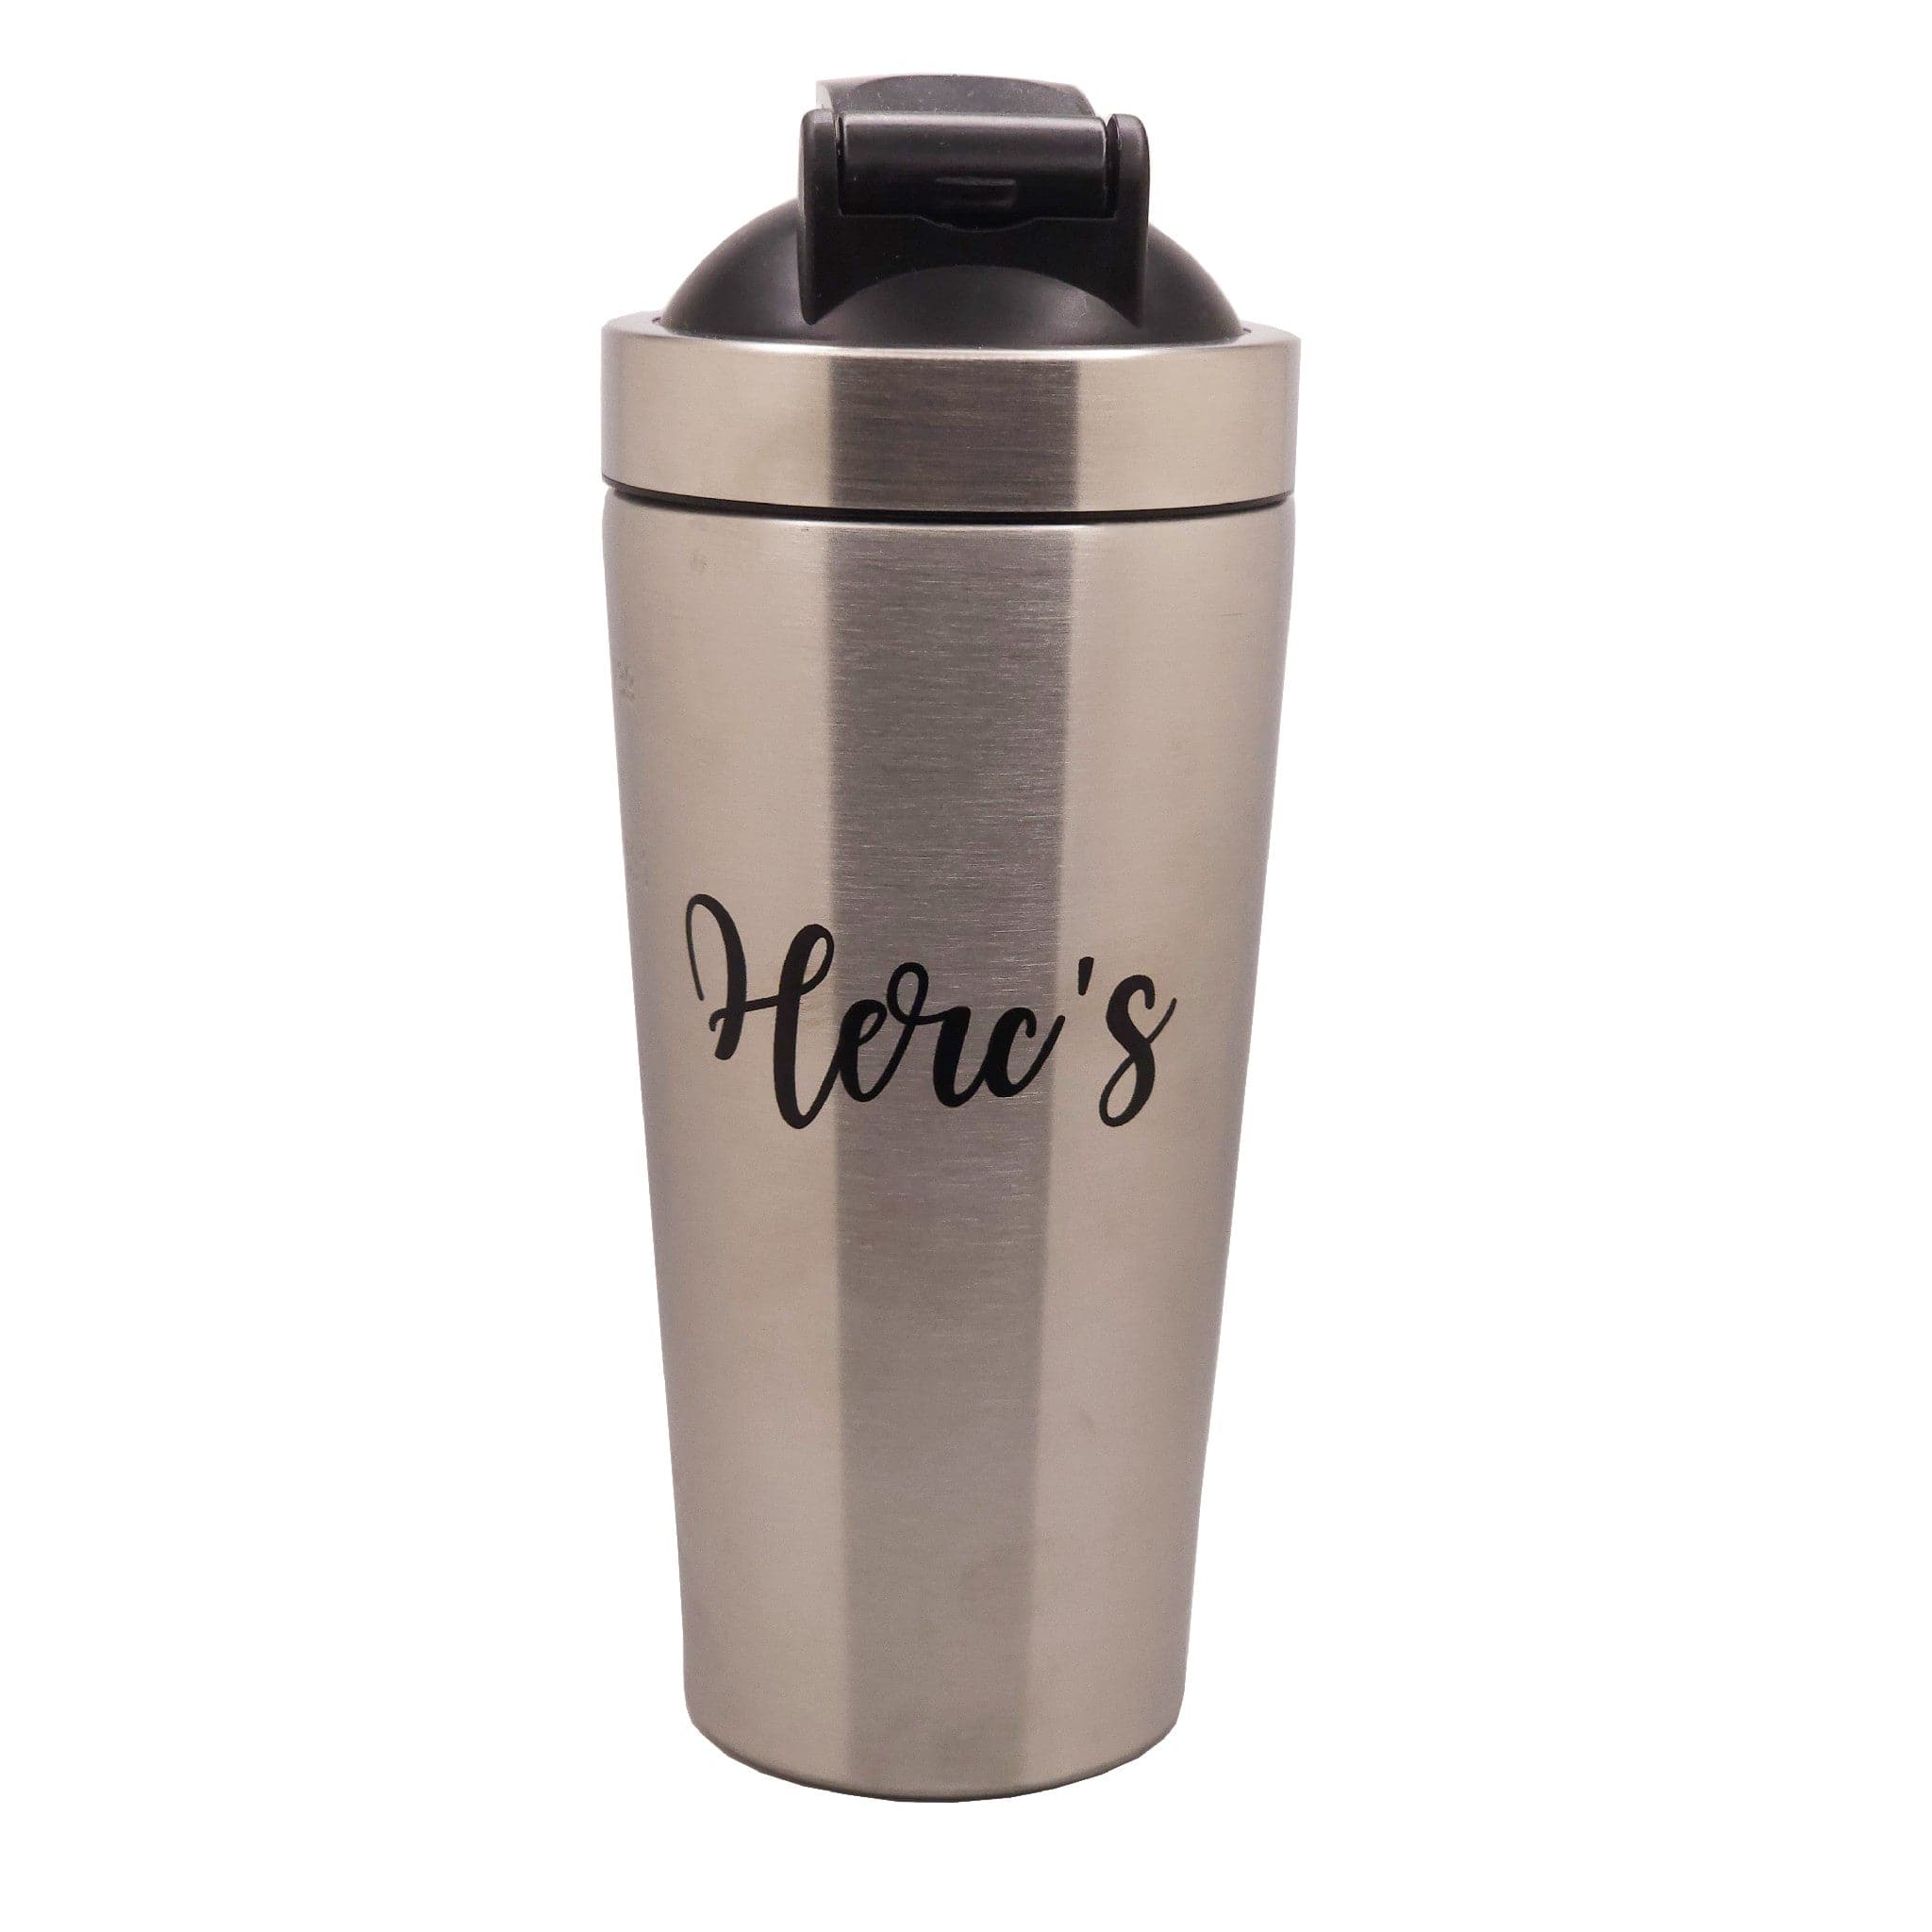 Herc's 750ml Stainless Steel Shaker Cup